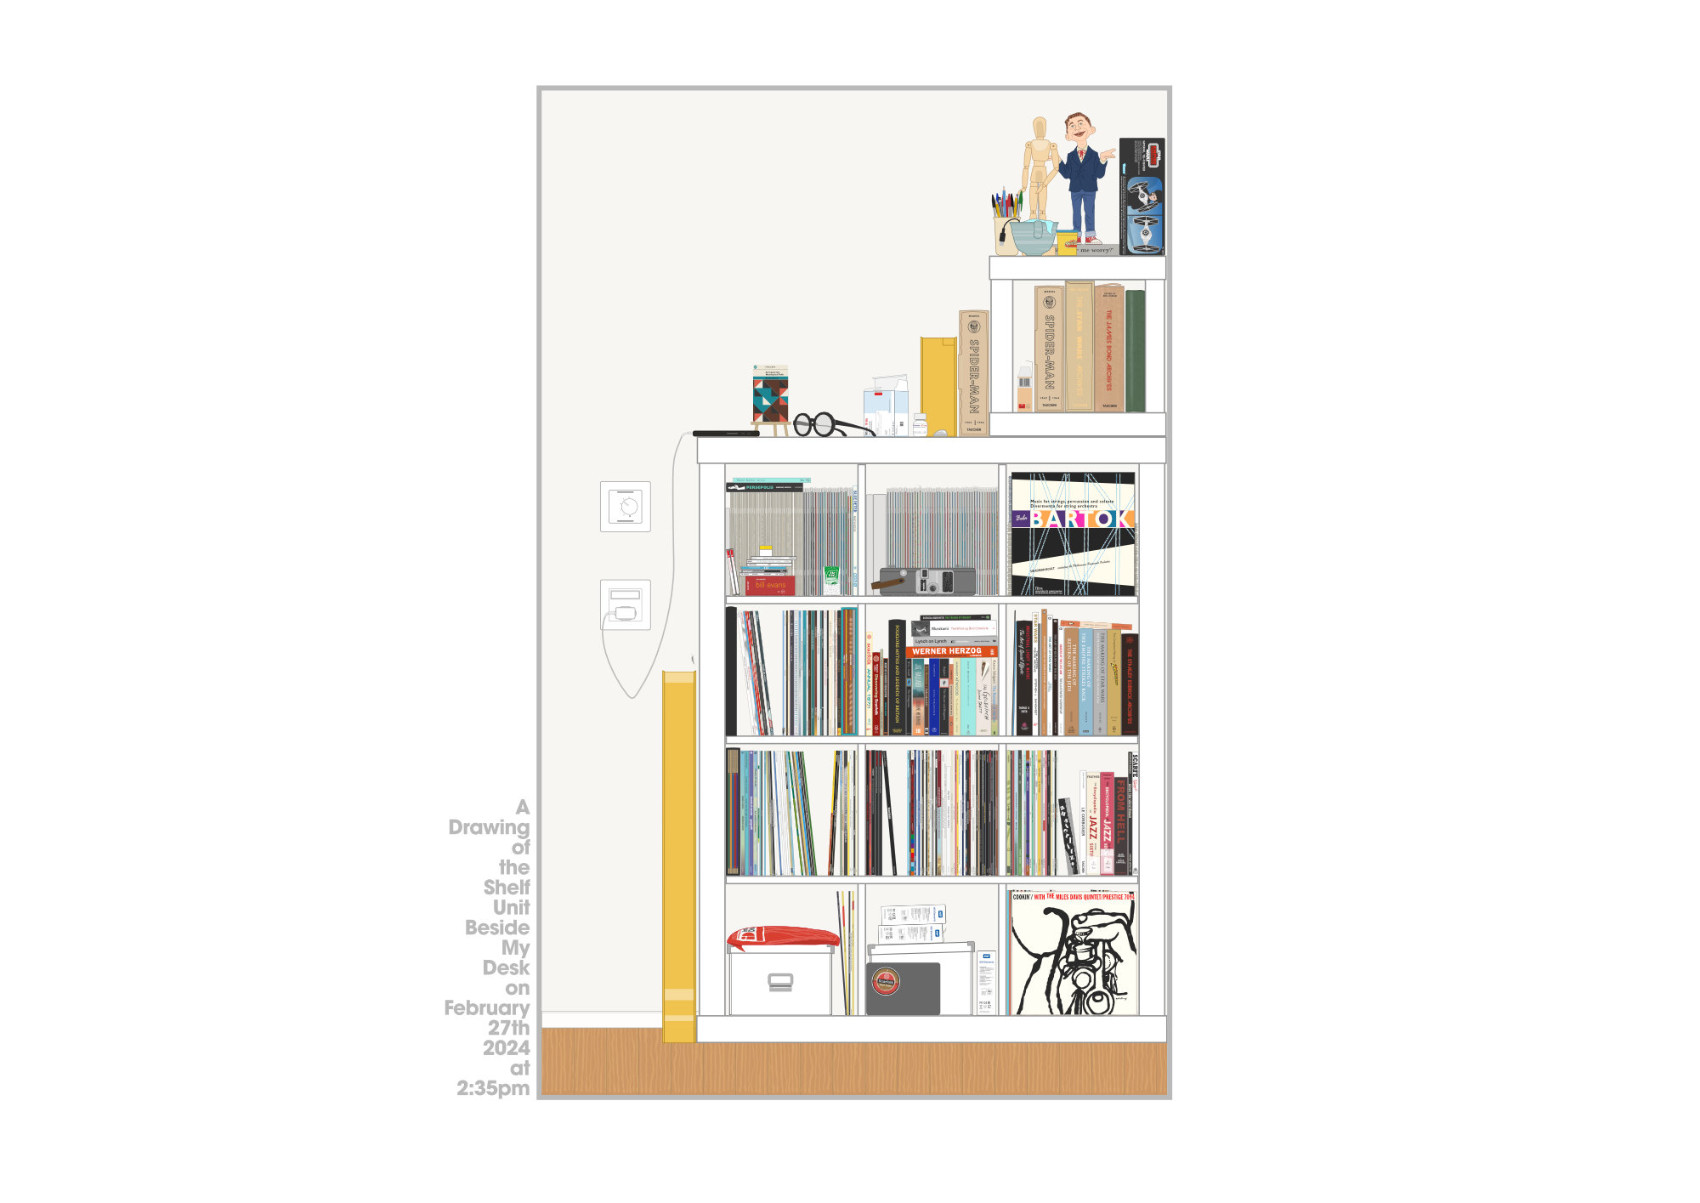 Overview of an image by Richard Littler, showing a hand drawn shelving unit with may items in very fine detail.